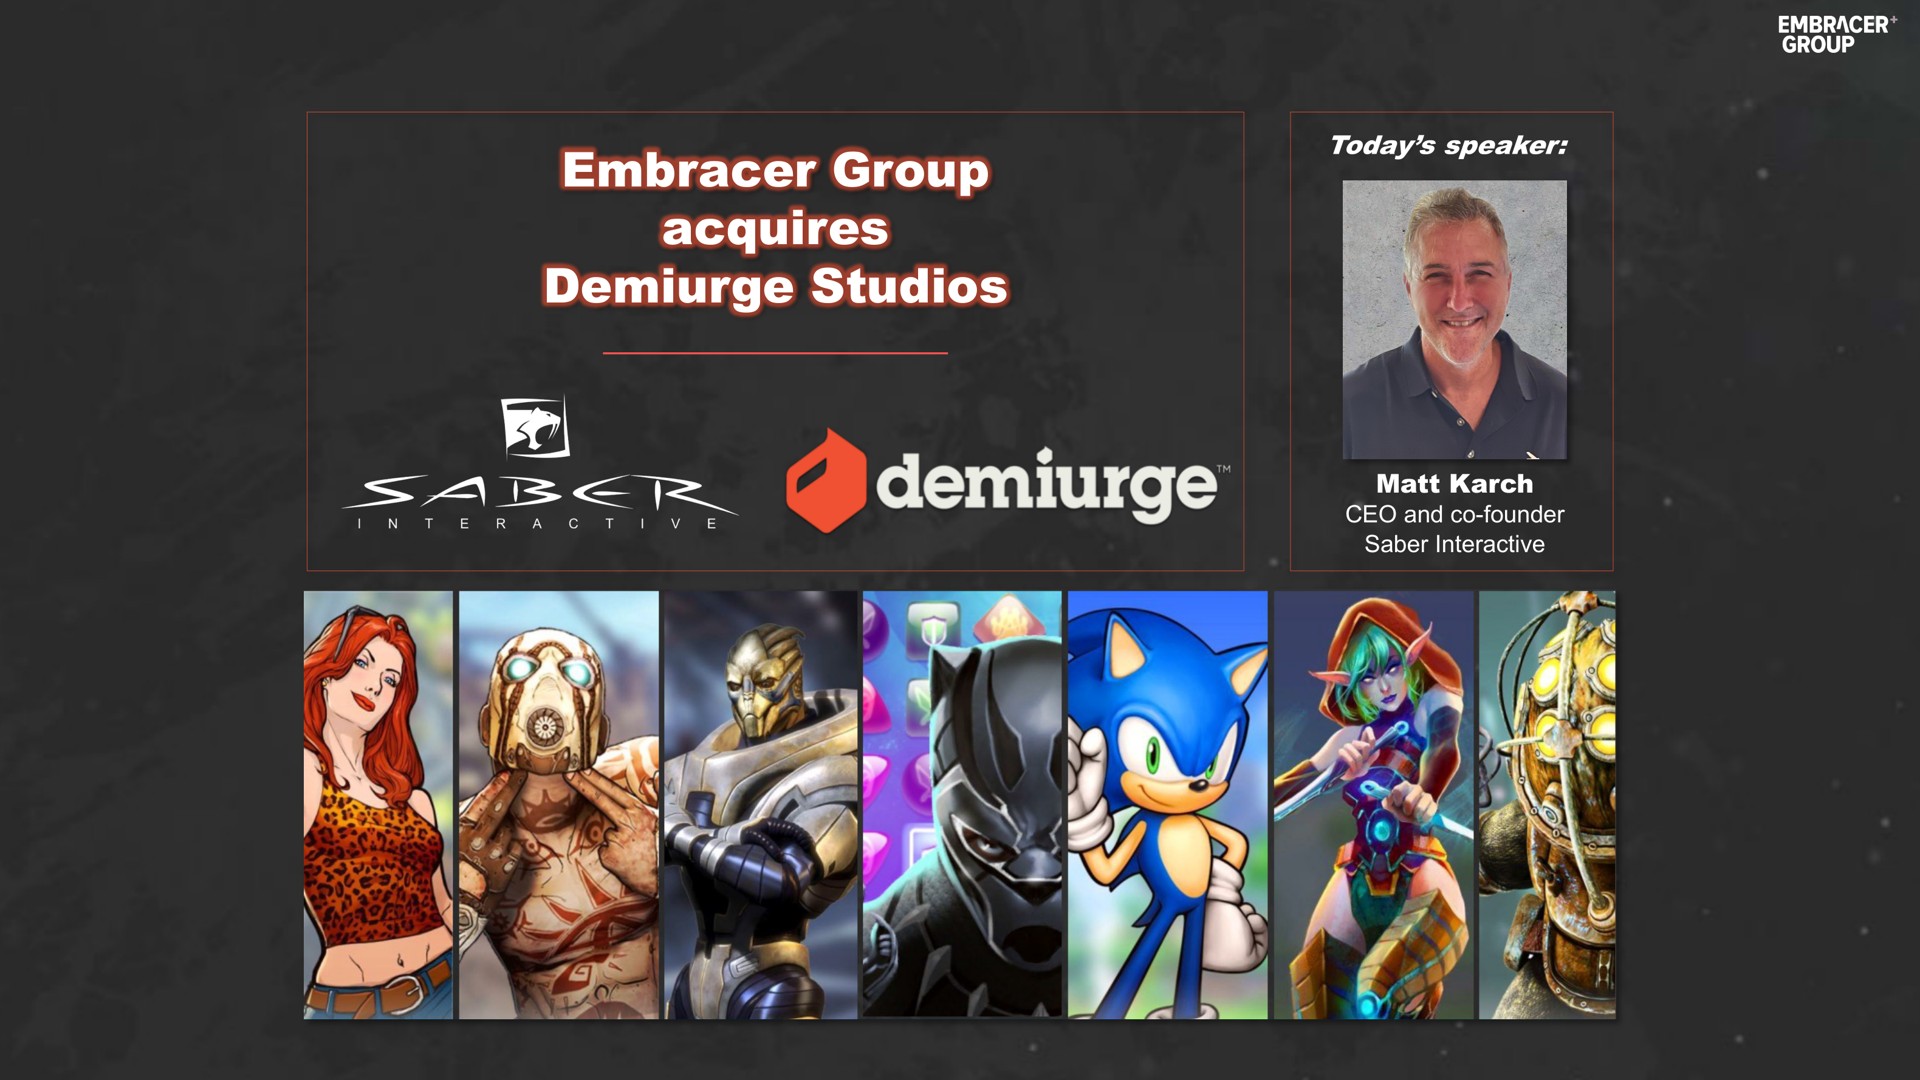 embracer group acquires demiurge studios as | Embracer Group